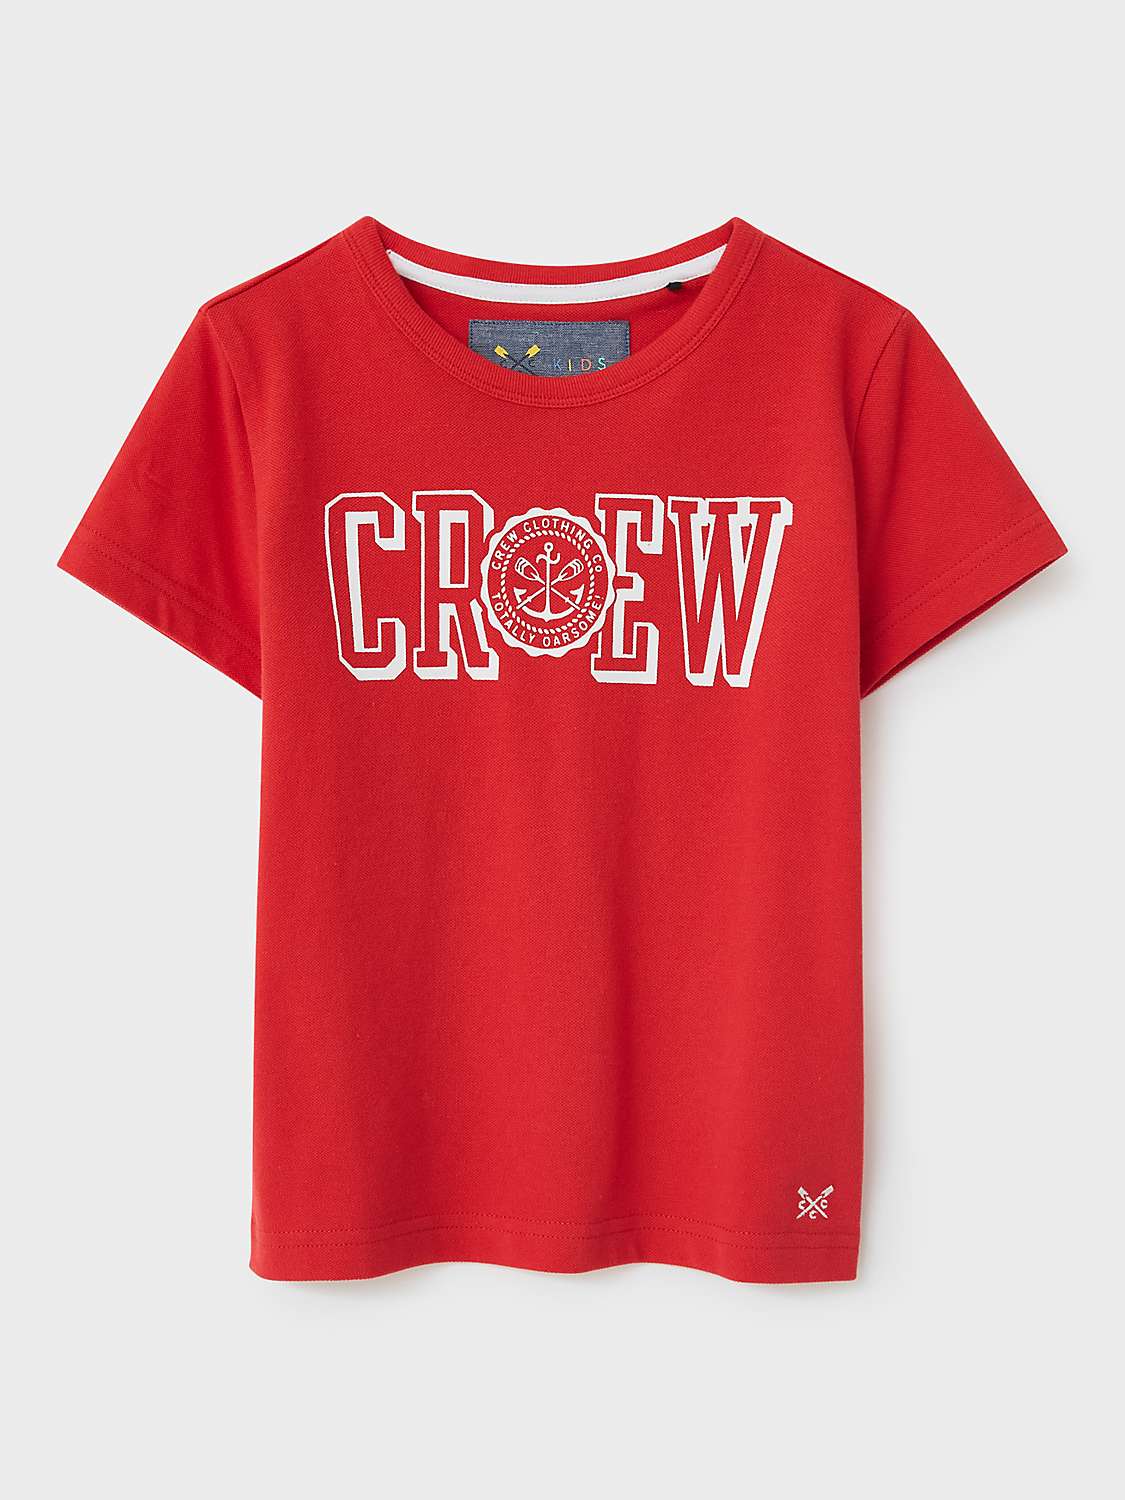 Buy Crew Clothing Kids' Totally Oarsome Logo T-Shirt, Bright Red Online at johnlewis.com